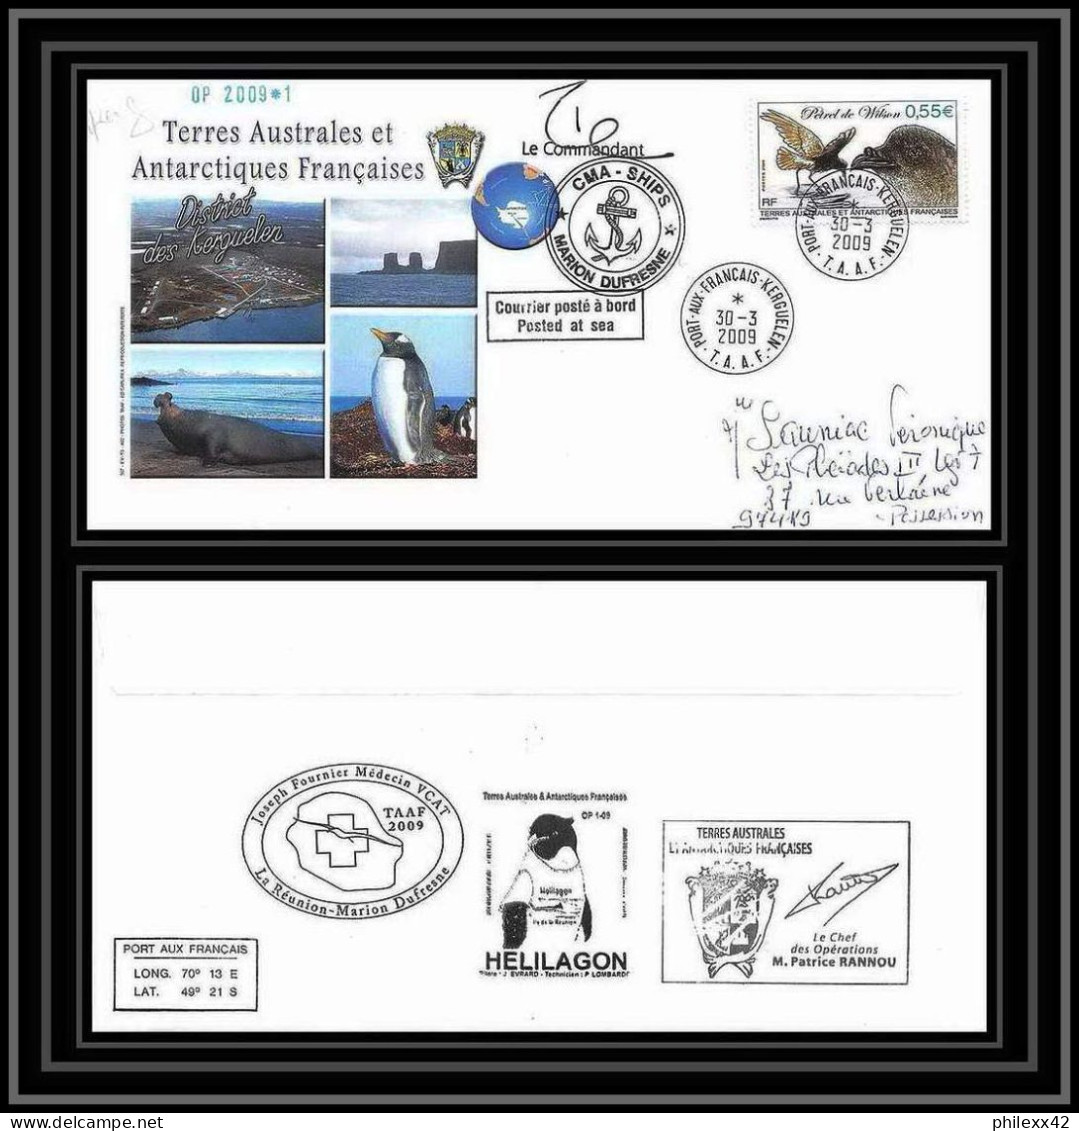 2497 ANTARCTIC Terres Australes TAAF Lettre Cover Dufresne 2 Signé Signed MD 145 KEOPS 18/1/2005 N°385 Dauphin Dolphin - Expediciones Antárticas